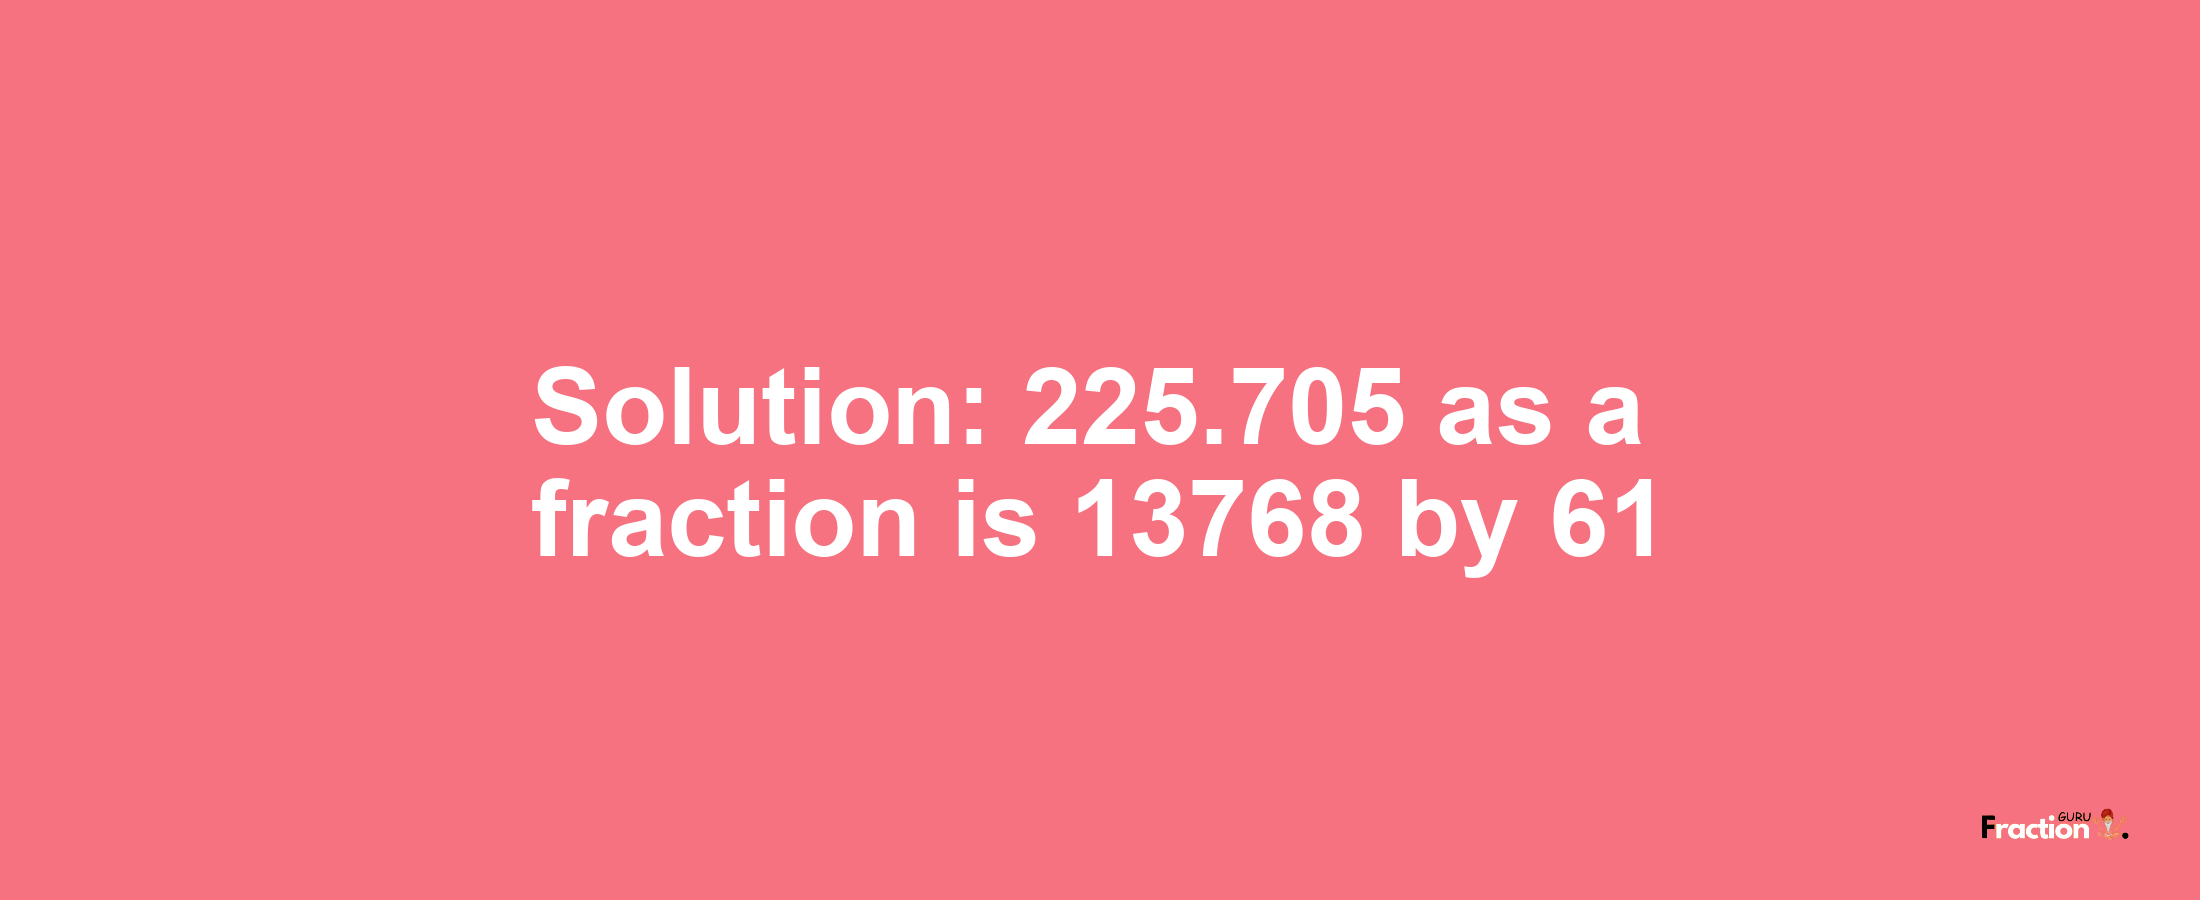 Solution:225.705 as a fraction is 13768/61